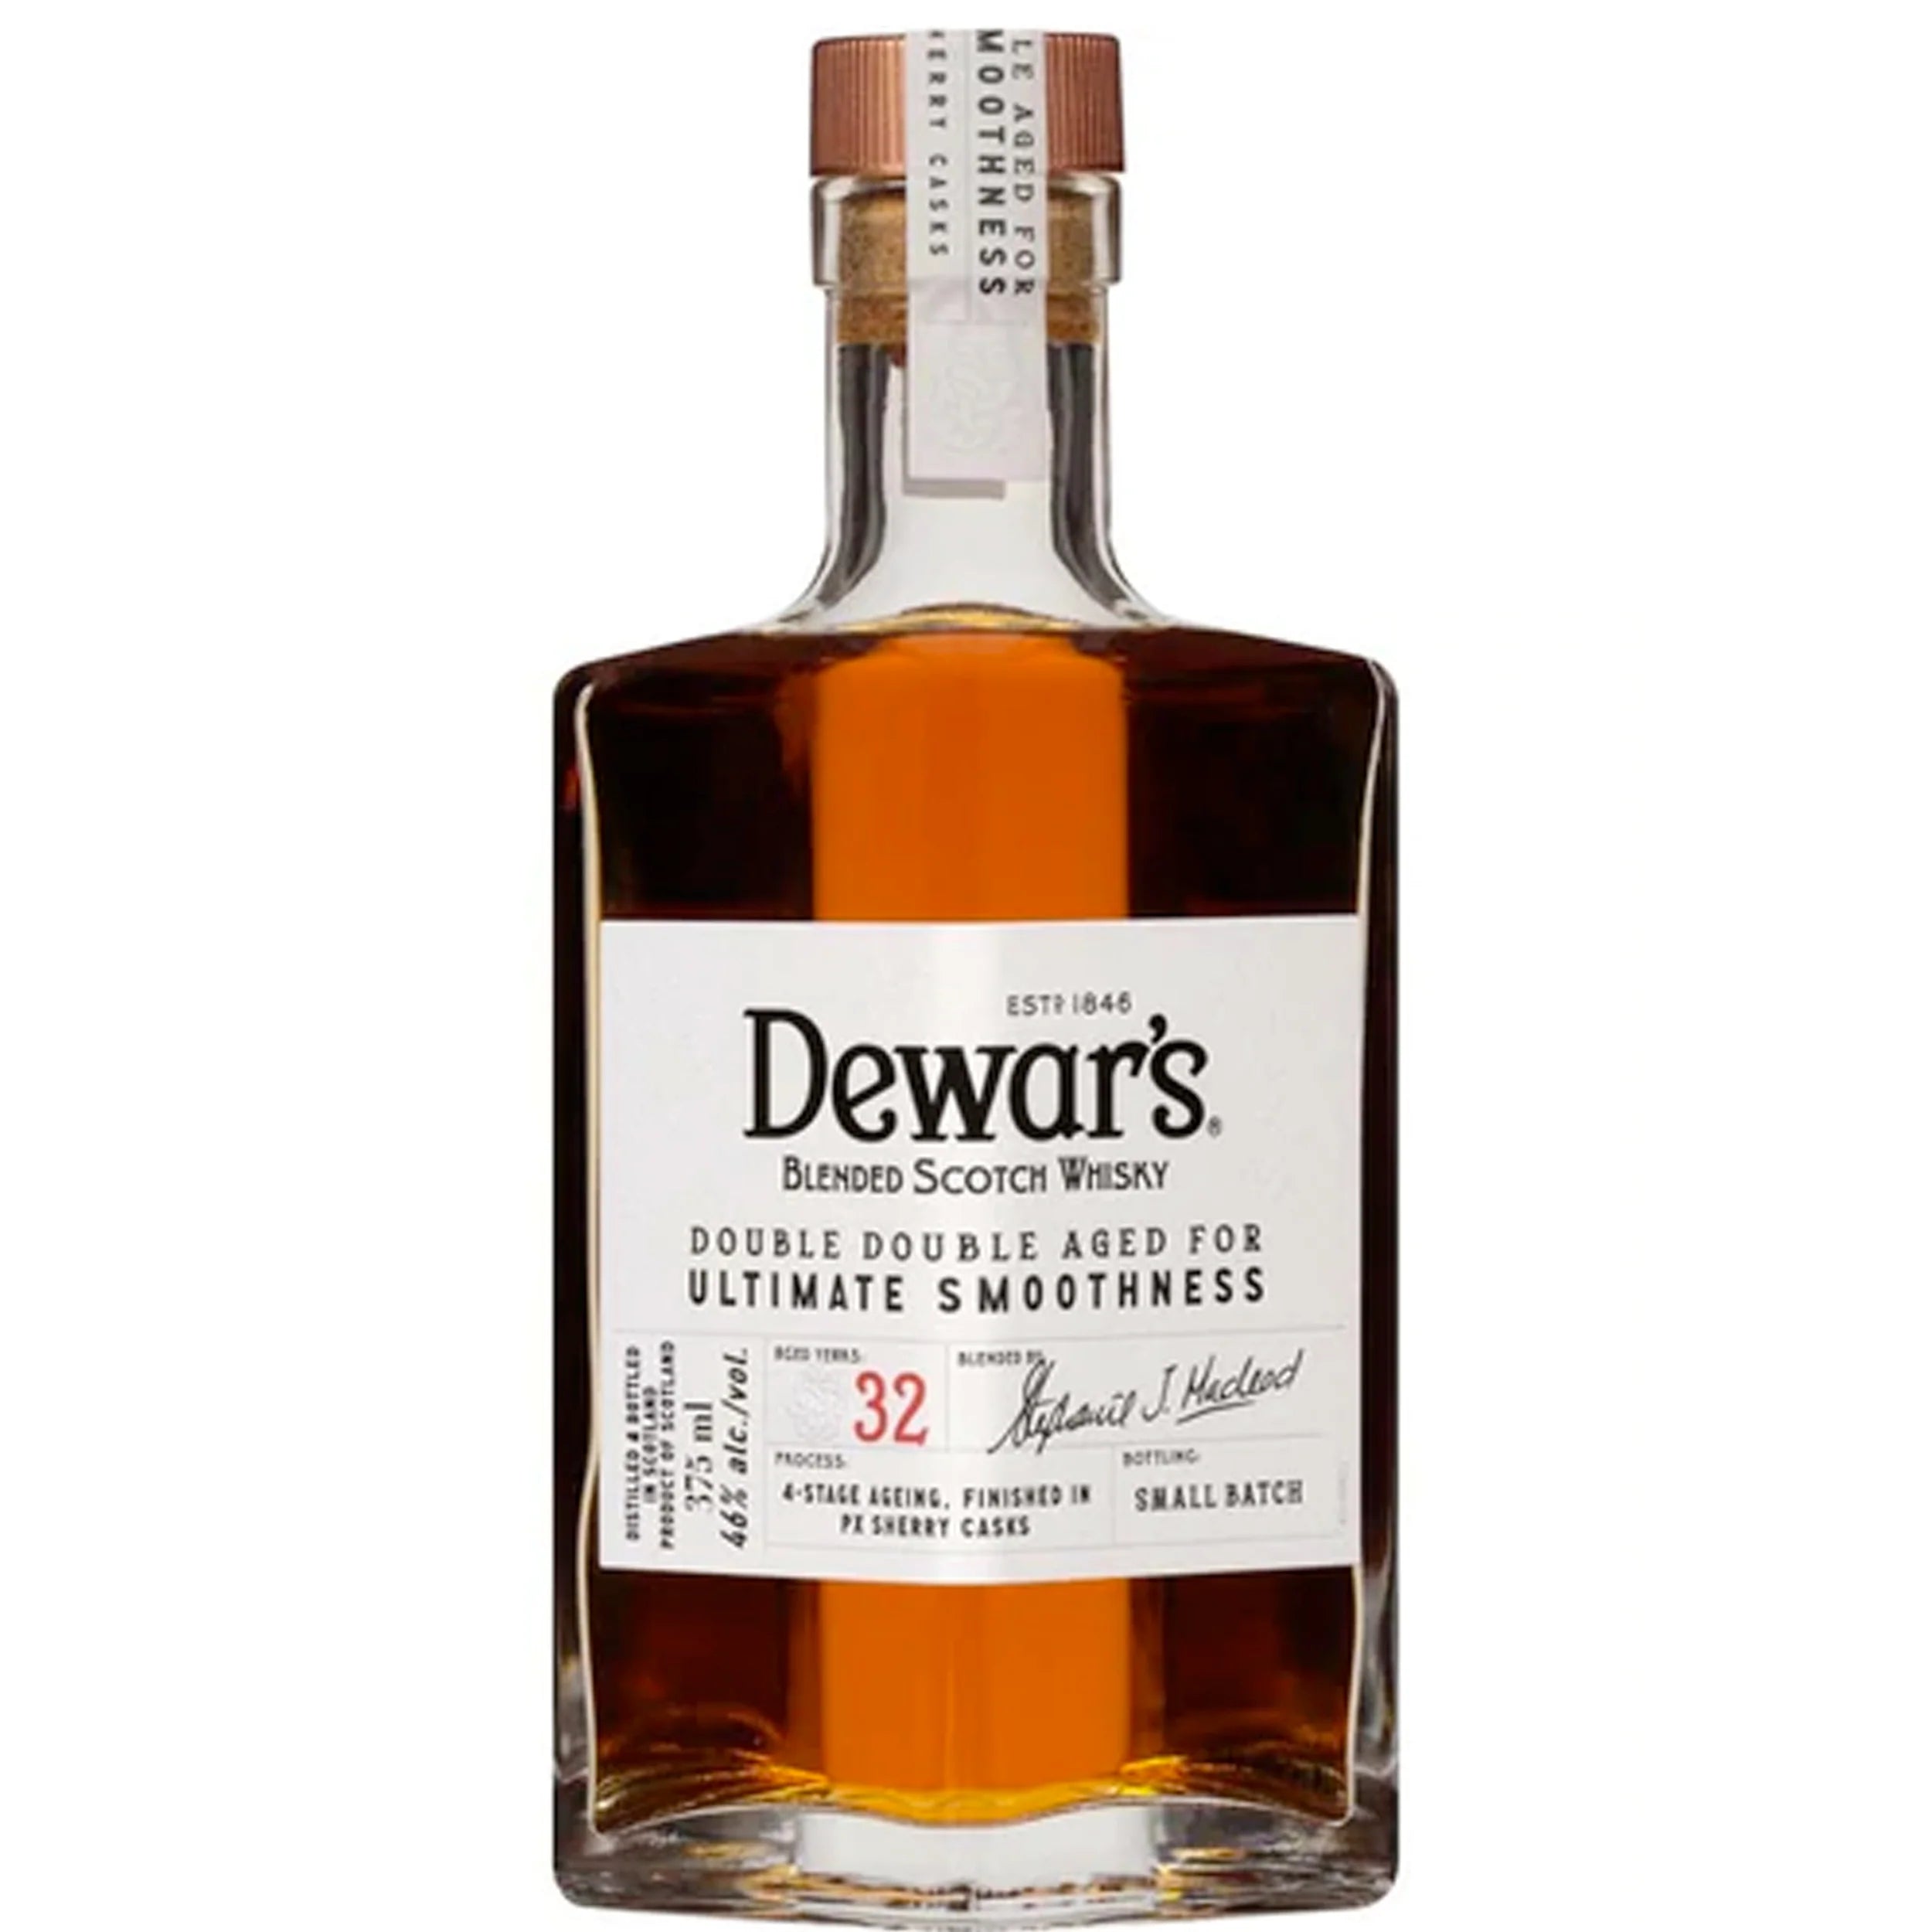 Dewar's Double Double 32 Year Old Blended Scotch Whisky 375ml